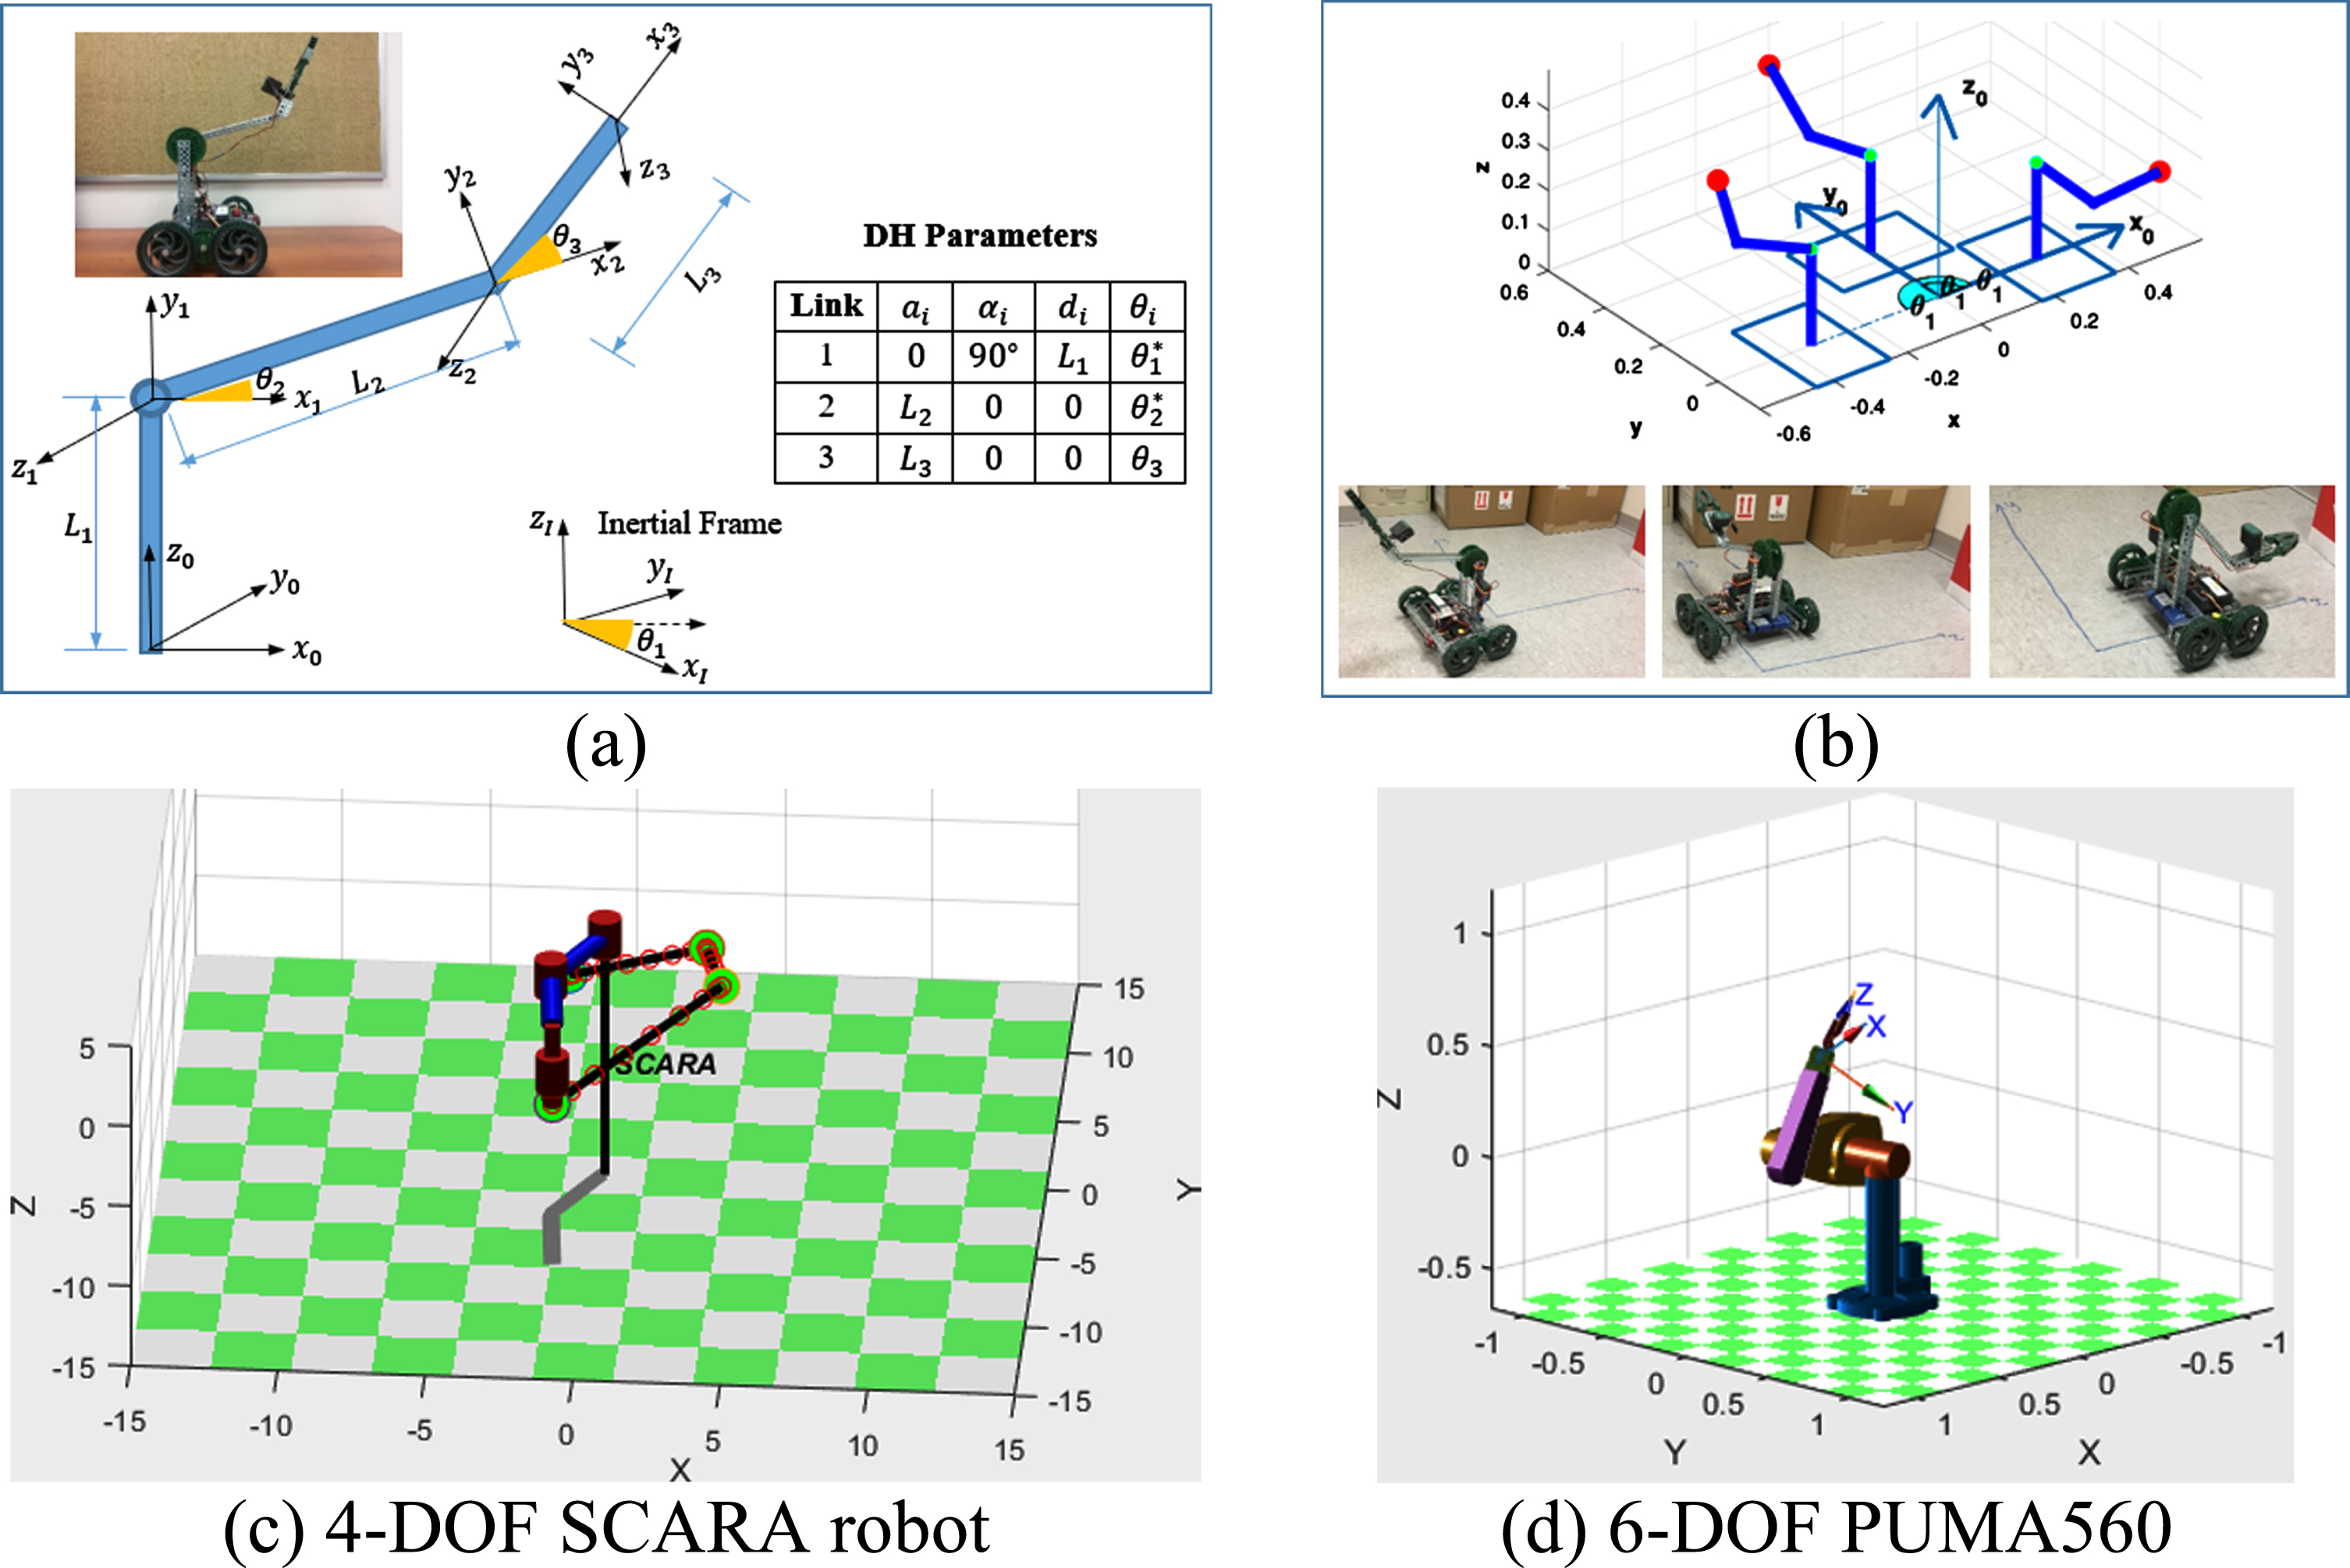 Trajectory generation of Robotic arms: using physical robot (Ma & Ma, 2019) vs. simulated robot.